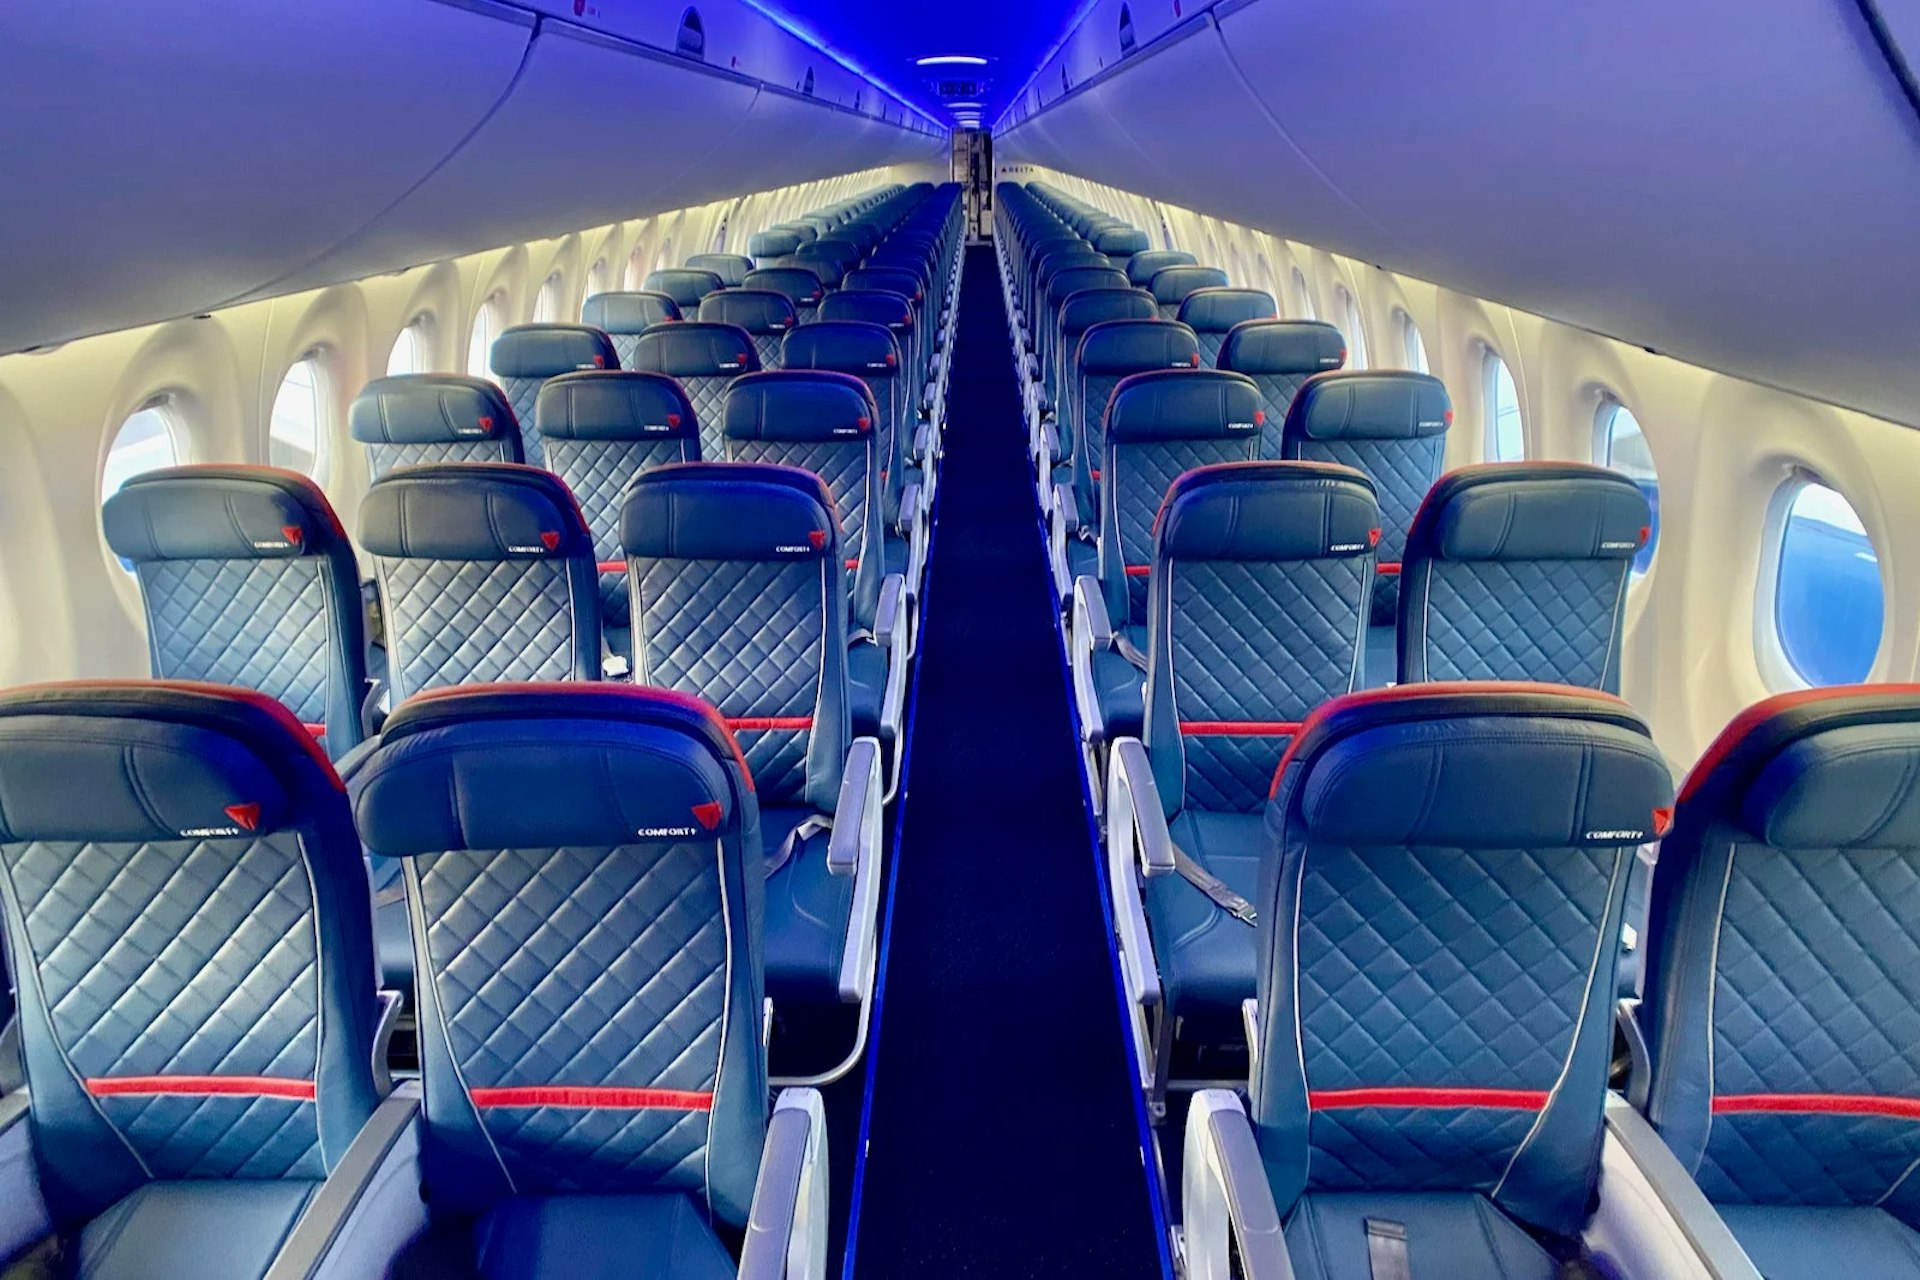 Inside Delta's Airbus A220-300 